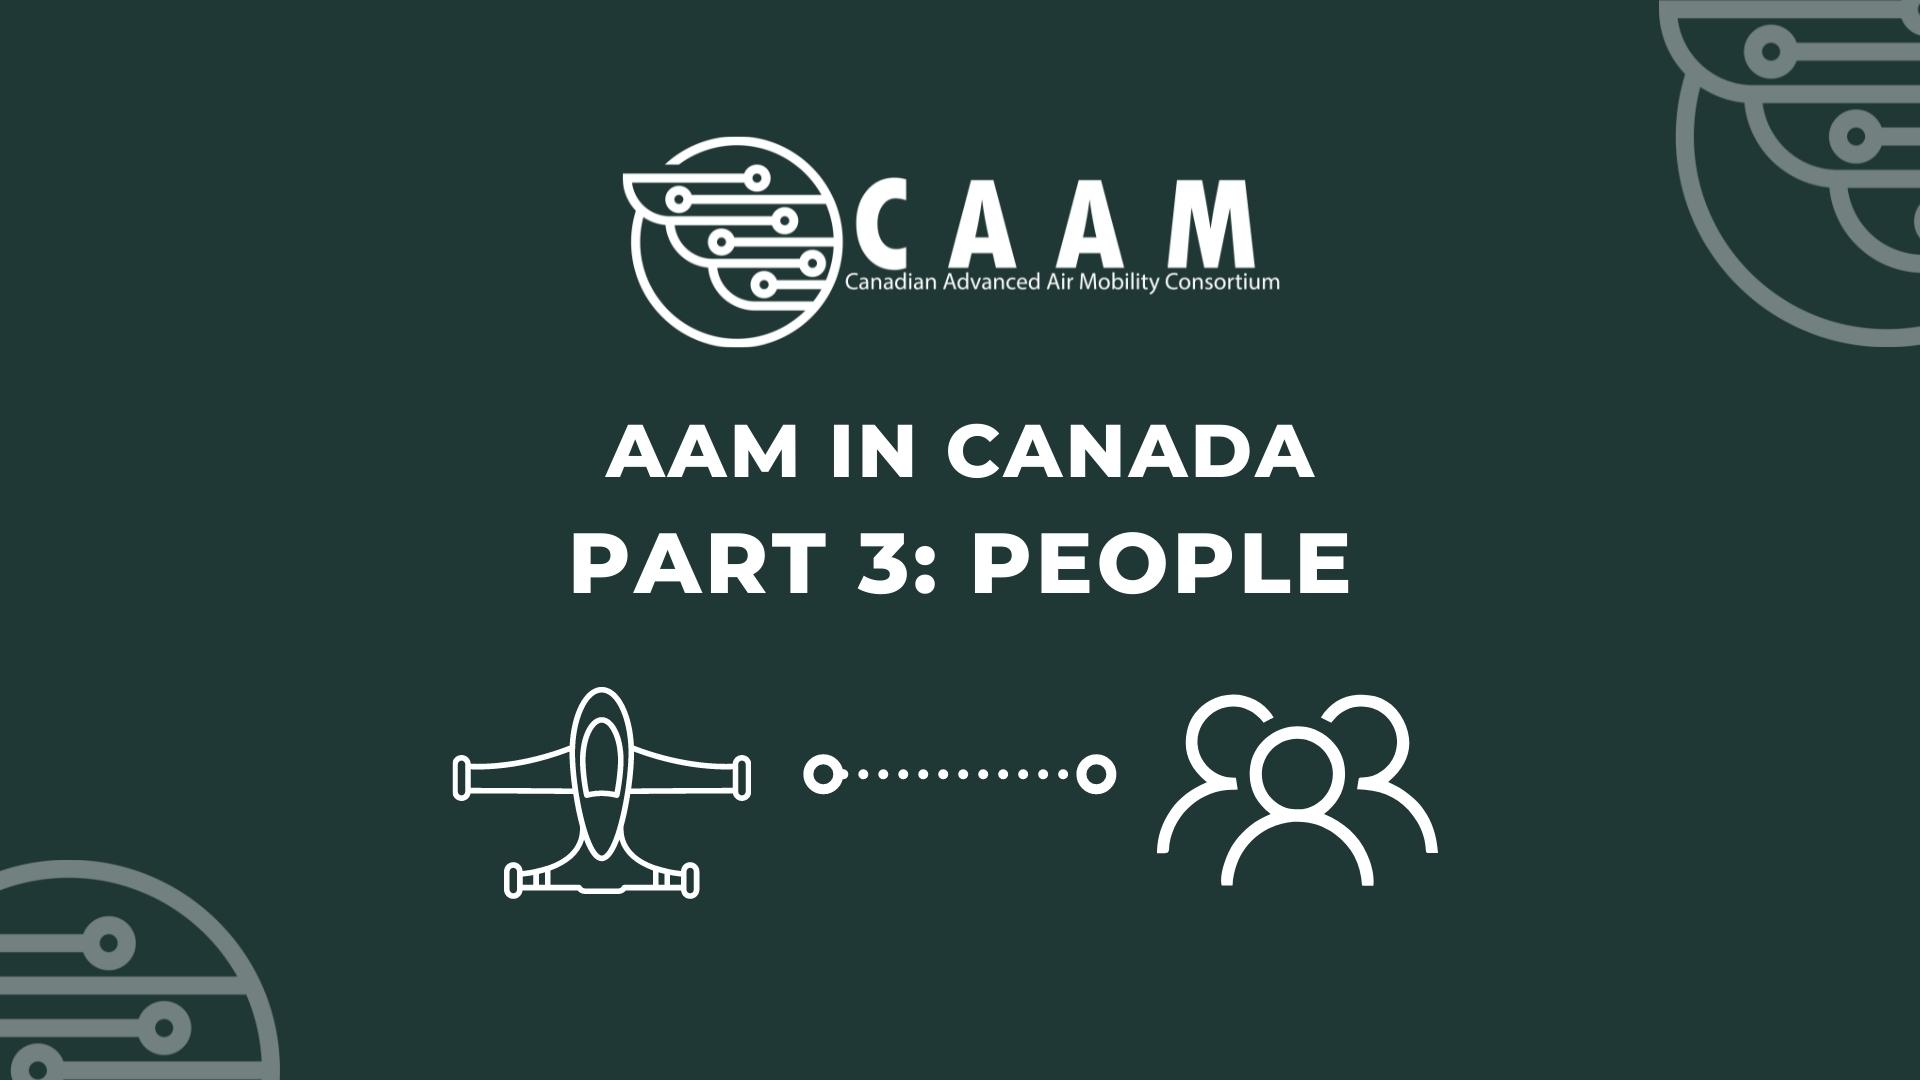 AAM IN CANADA - PART 3, People